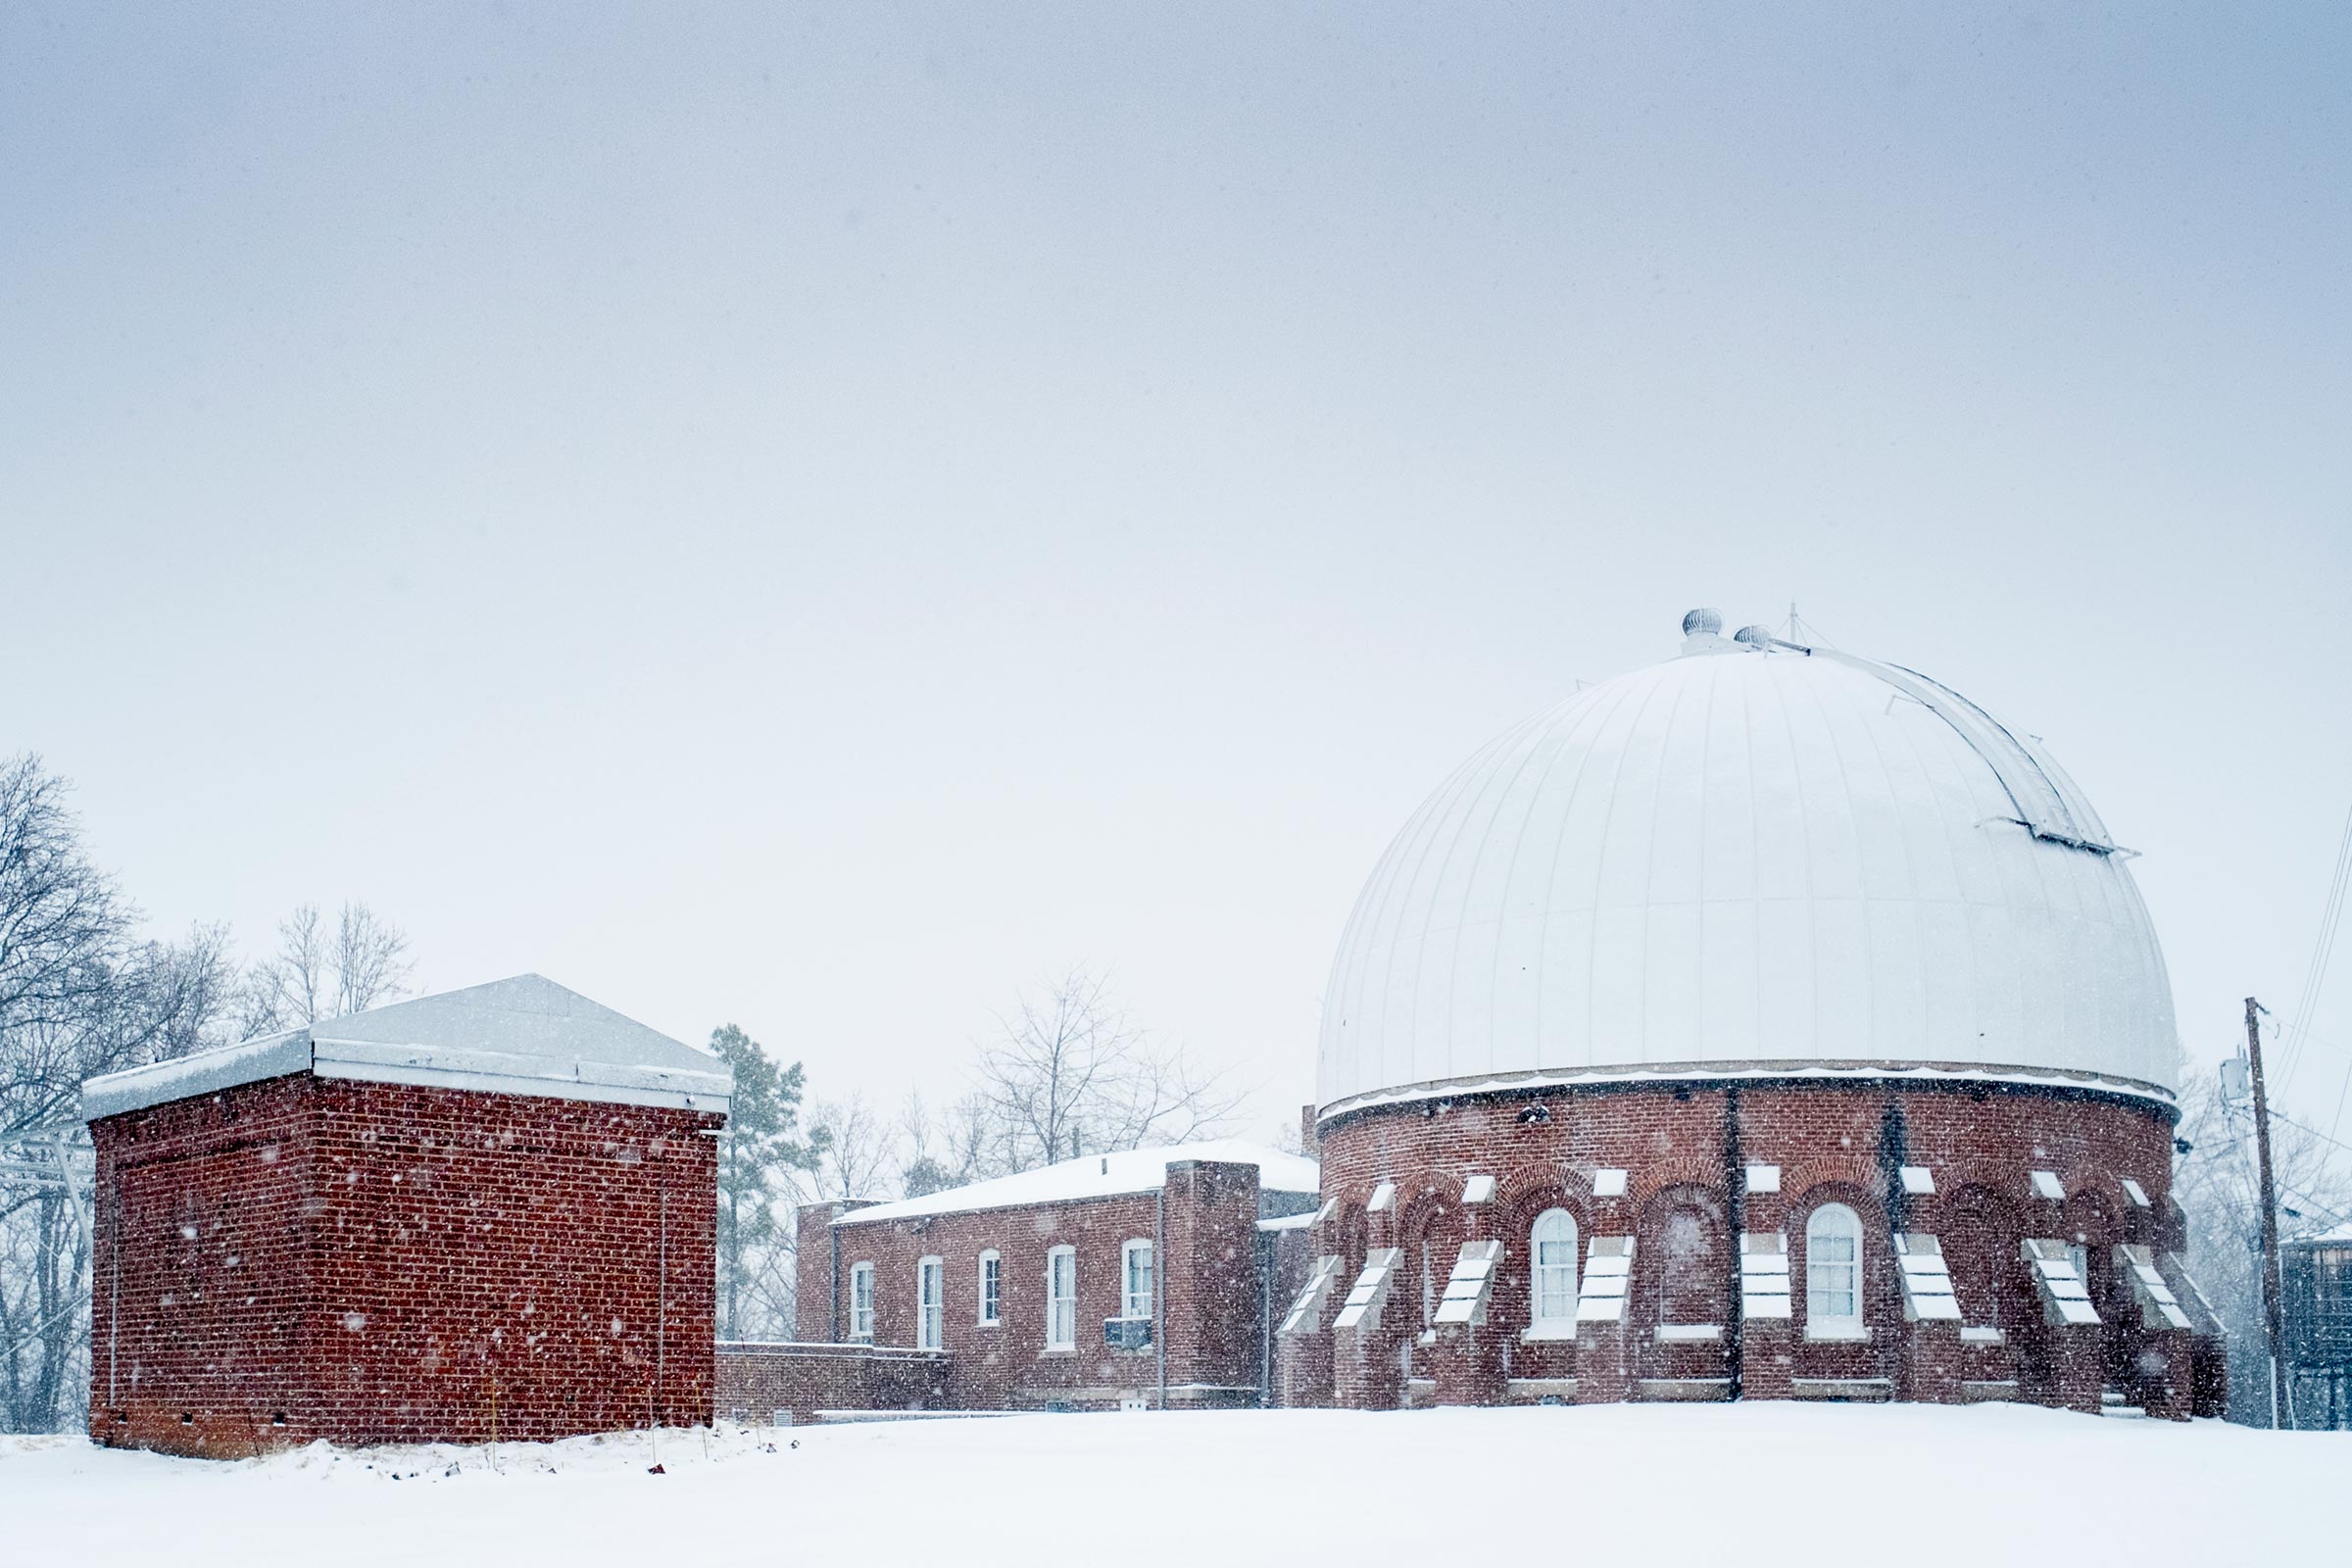 The McCormick Observatory covered in Snow